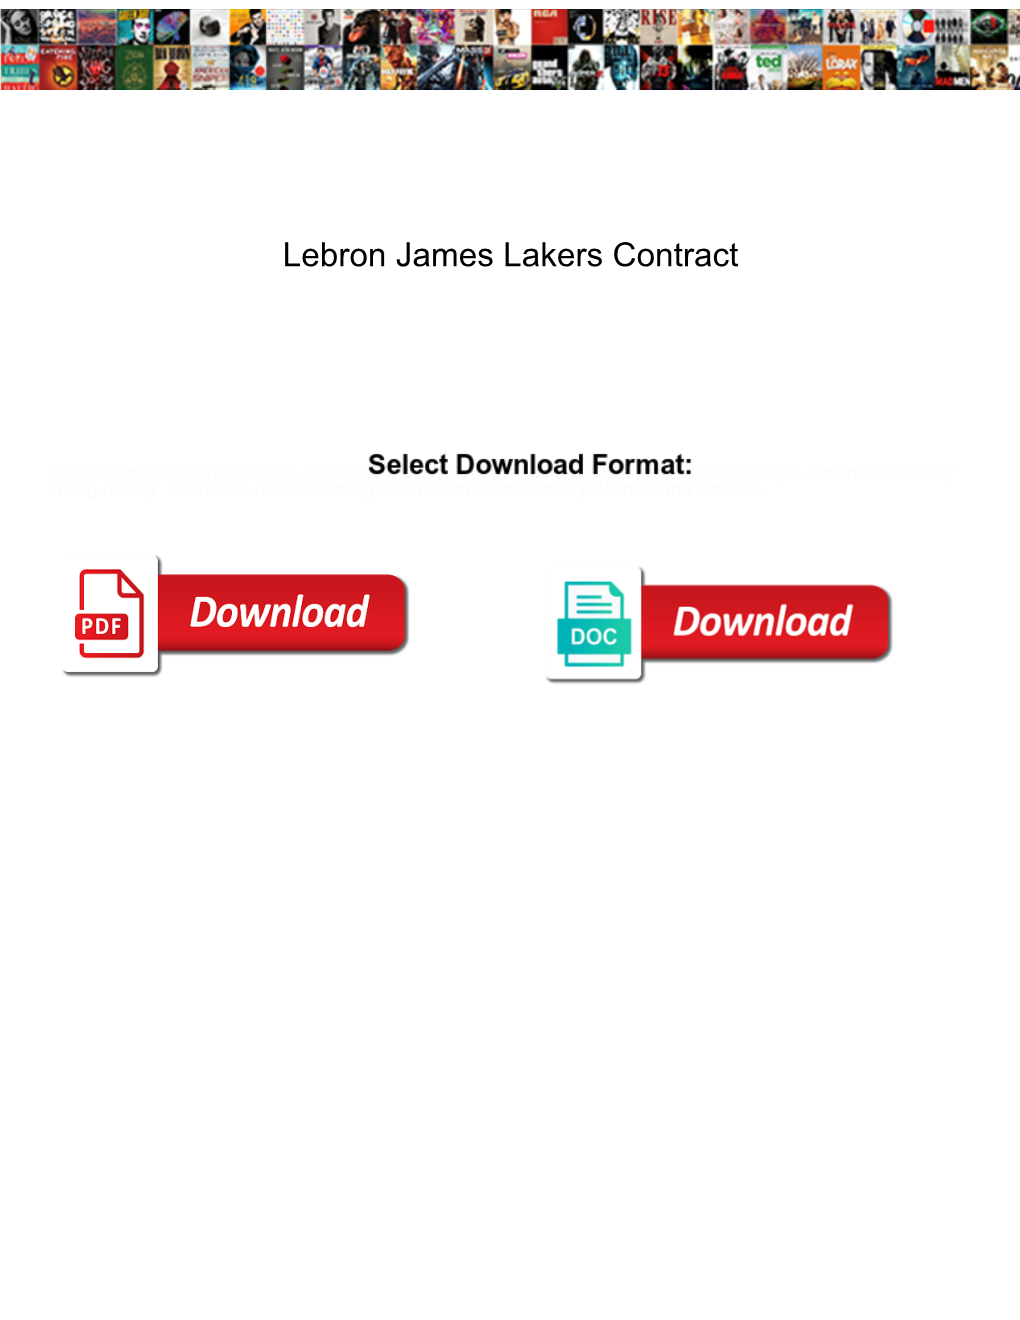 Lebron James Lakers Contract